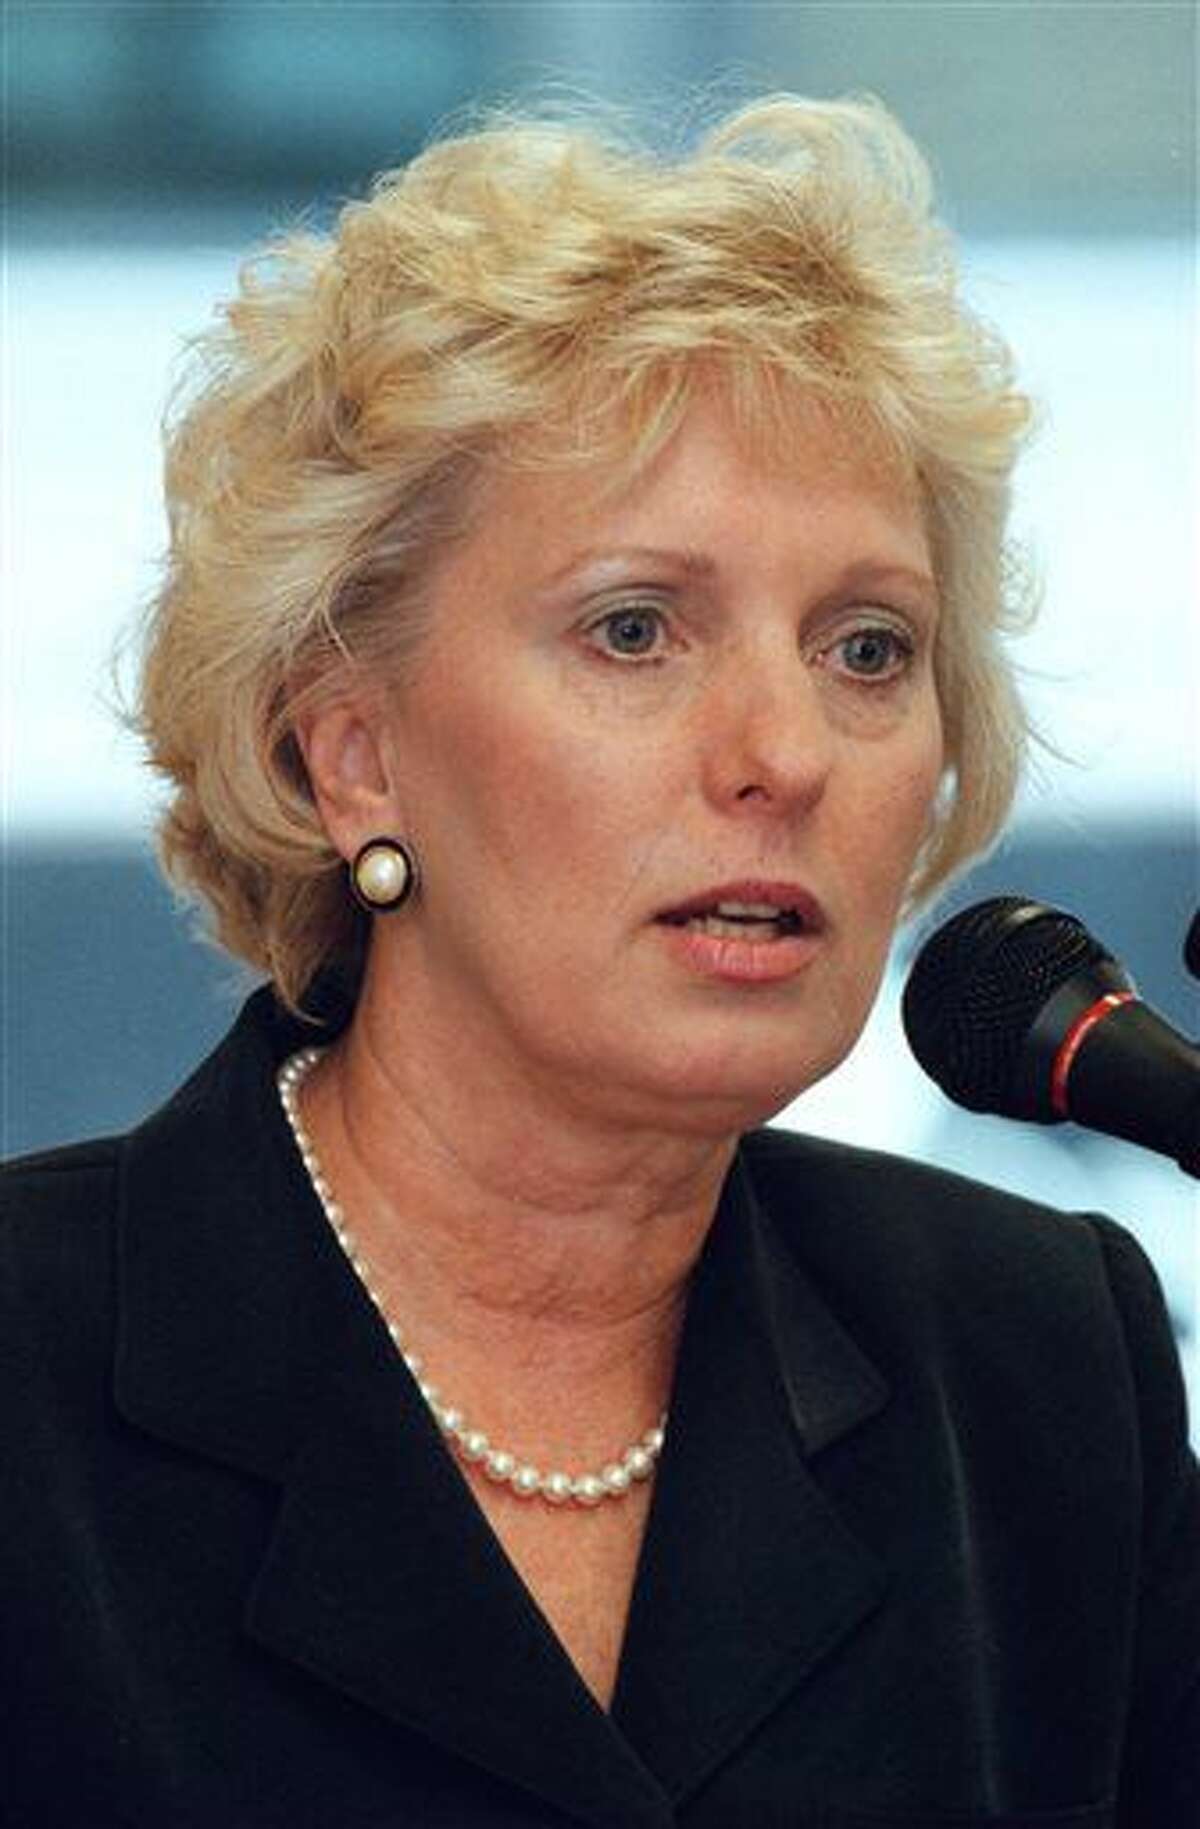 In an Oct. 20, 1998 photo, Appellate court candidate Judge Judith Lanzinger speaks at Toledo Bar Association lunch in Toledo, Ohio. For the sixth time, she will co-teach a course on literature, poetry, and the law with fellow judges in September 2016 in Ashland, Ore., for the National Judicial College. The course will coincide with the Oregon Shakespeare Festival. (Dave Zapotosky/The Blade via AP)